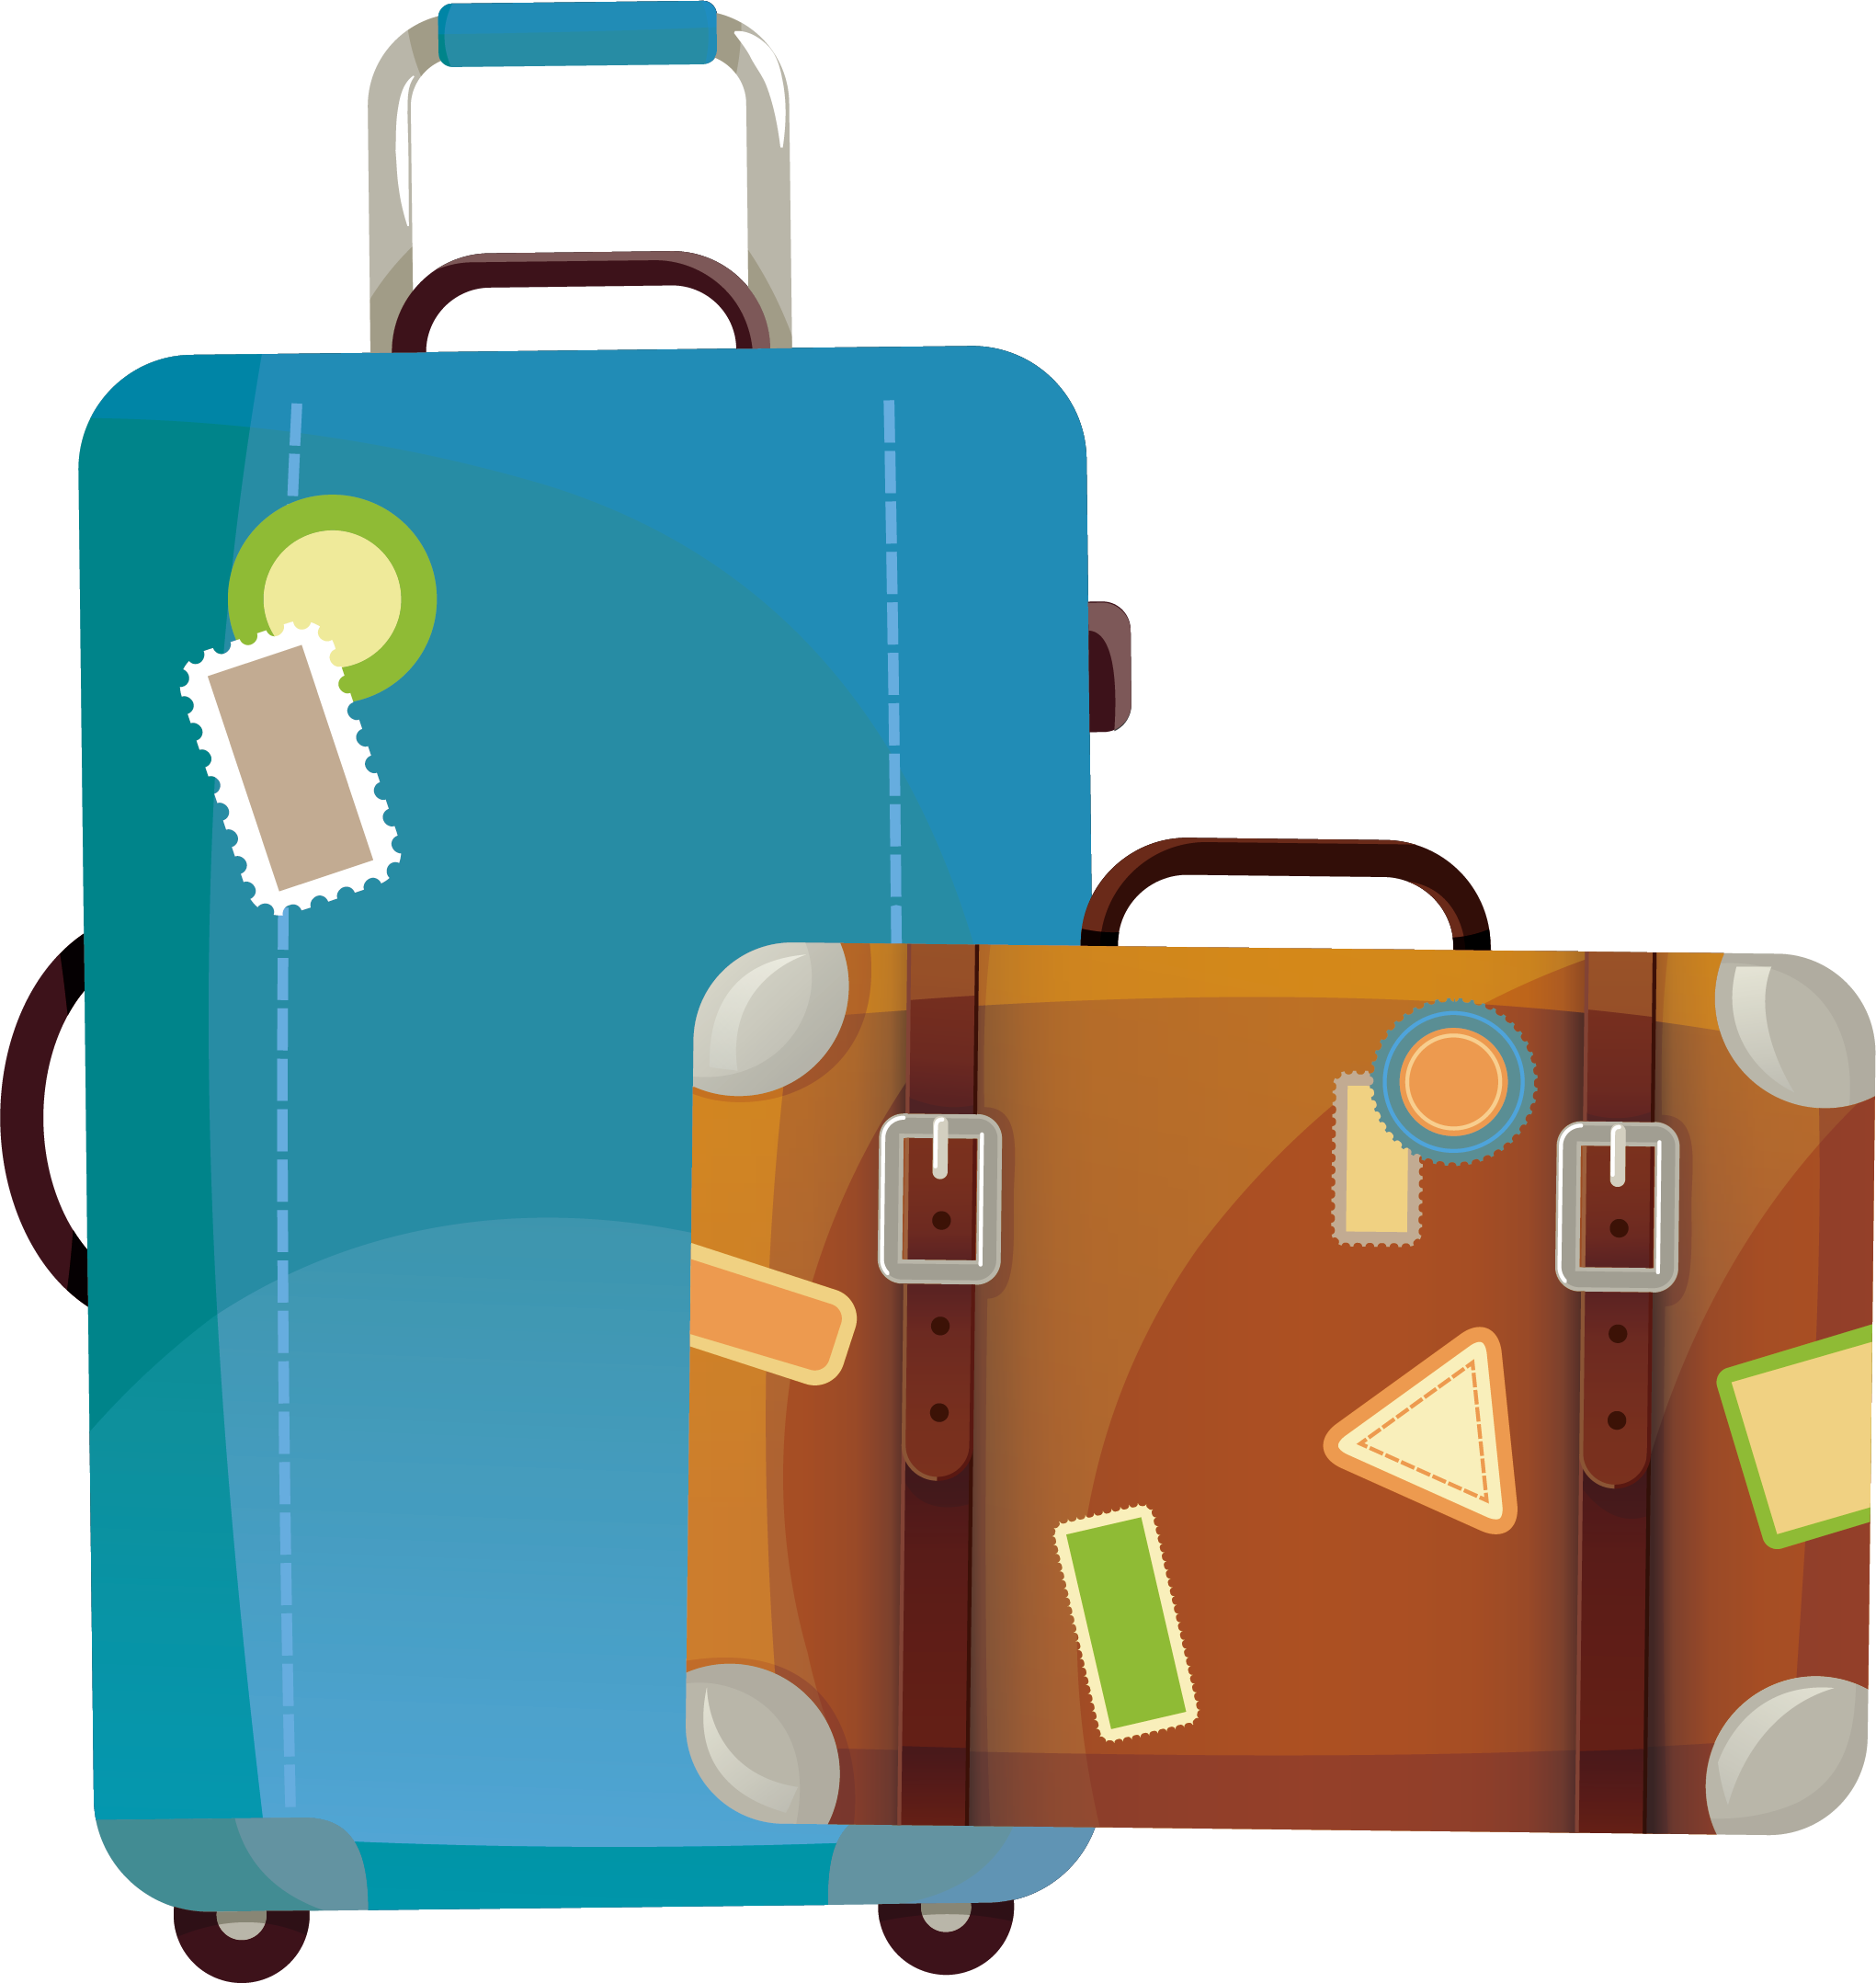 Luggage clipart vector, Luggage vector Transparent FREE for download on ...